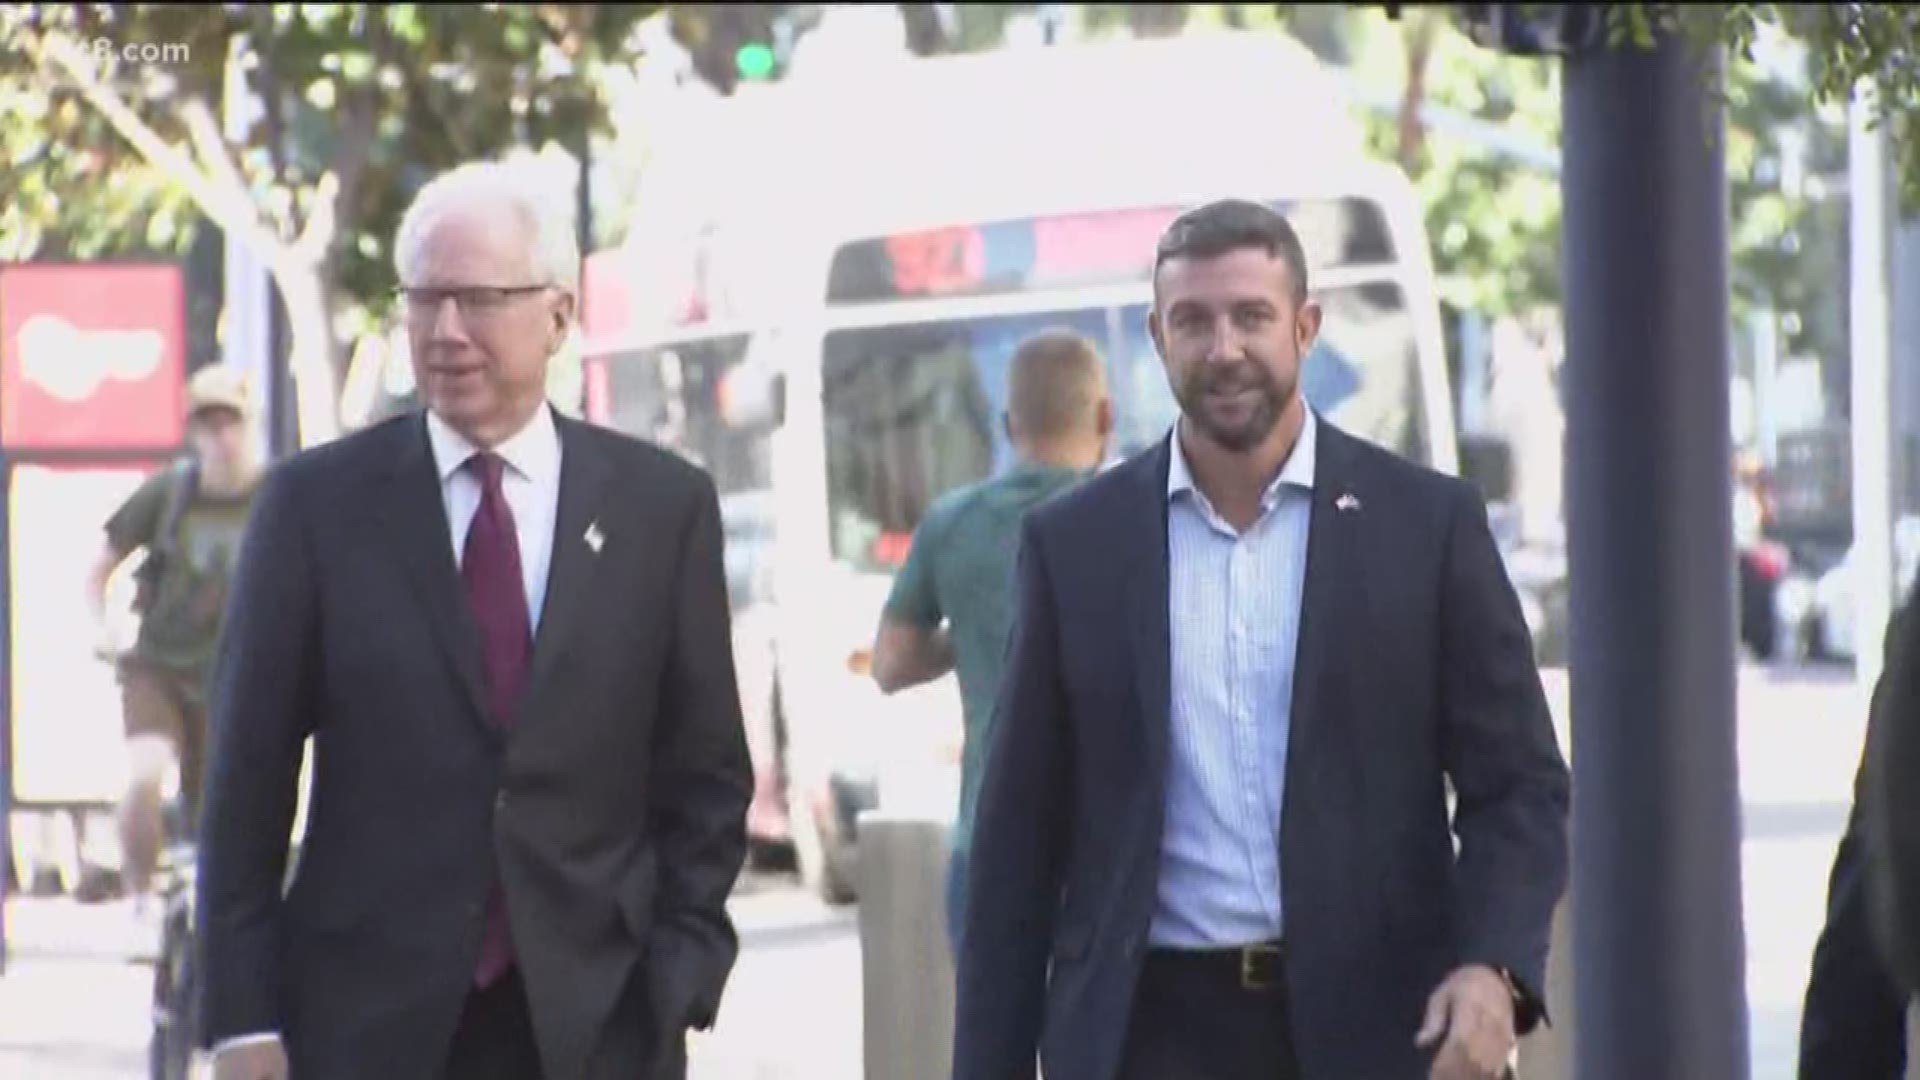 California Rep. Duncan Hunter said he plans to plead guilty to misusing campaign funds and is prepared to go to jail.